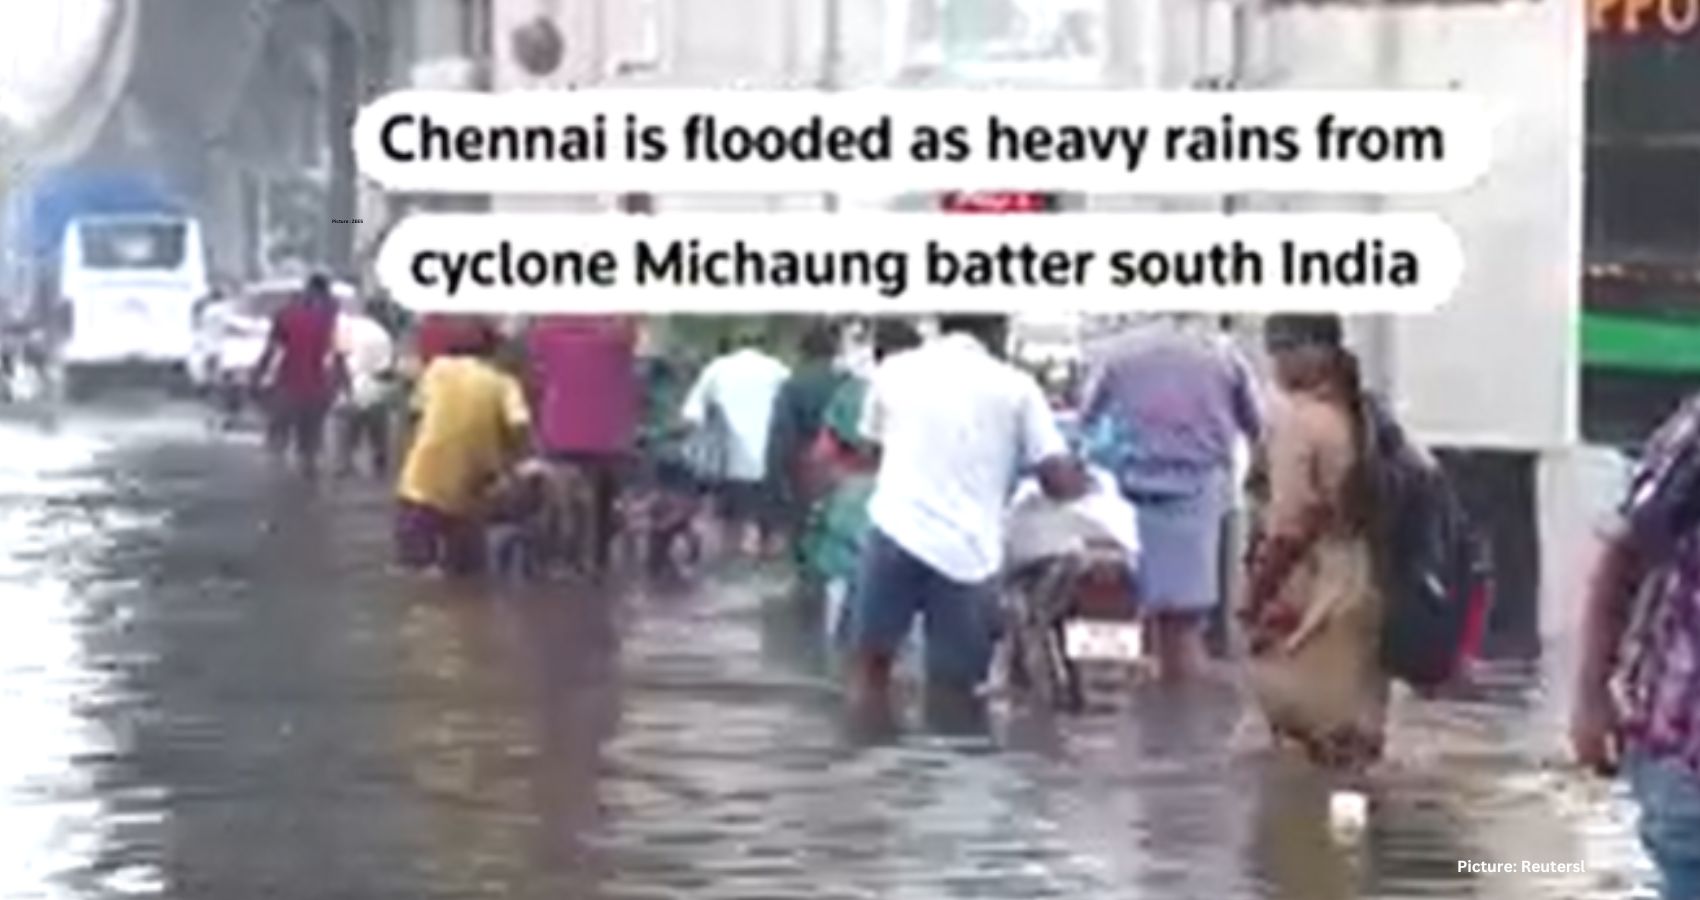 Cyclone Michaung Leaves Chennai in Deluge Crisis: Rescuers Battle Flooding as City Grapples with Devastation